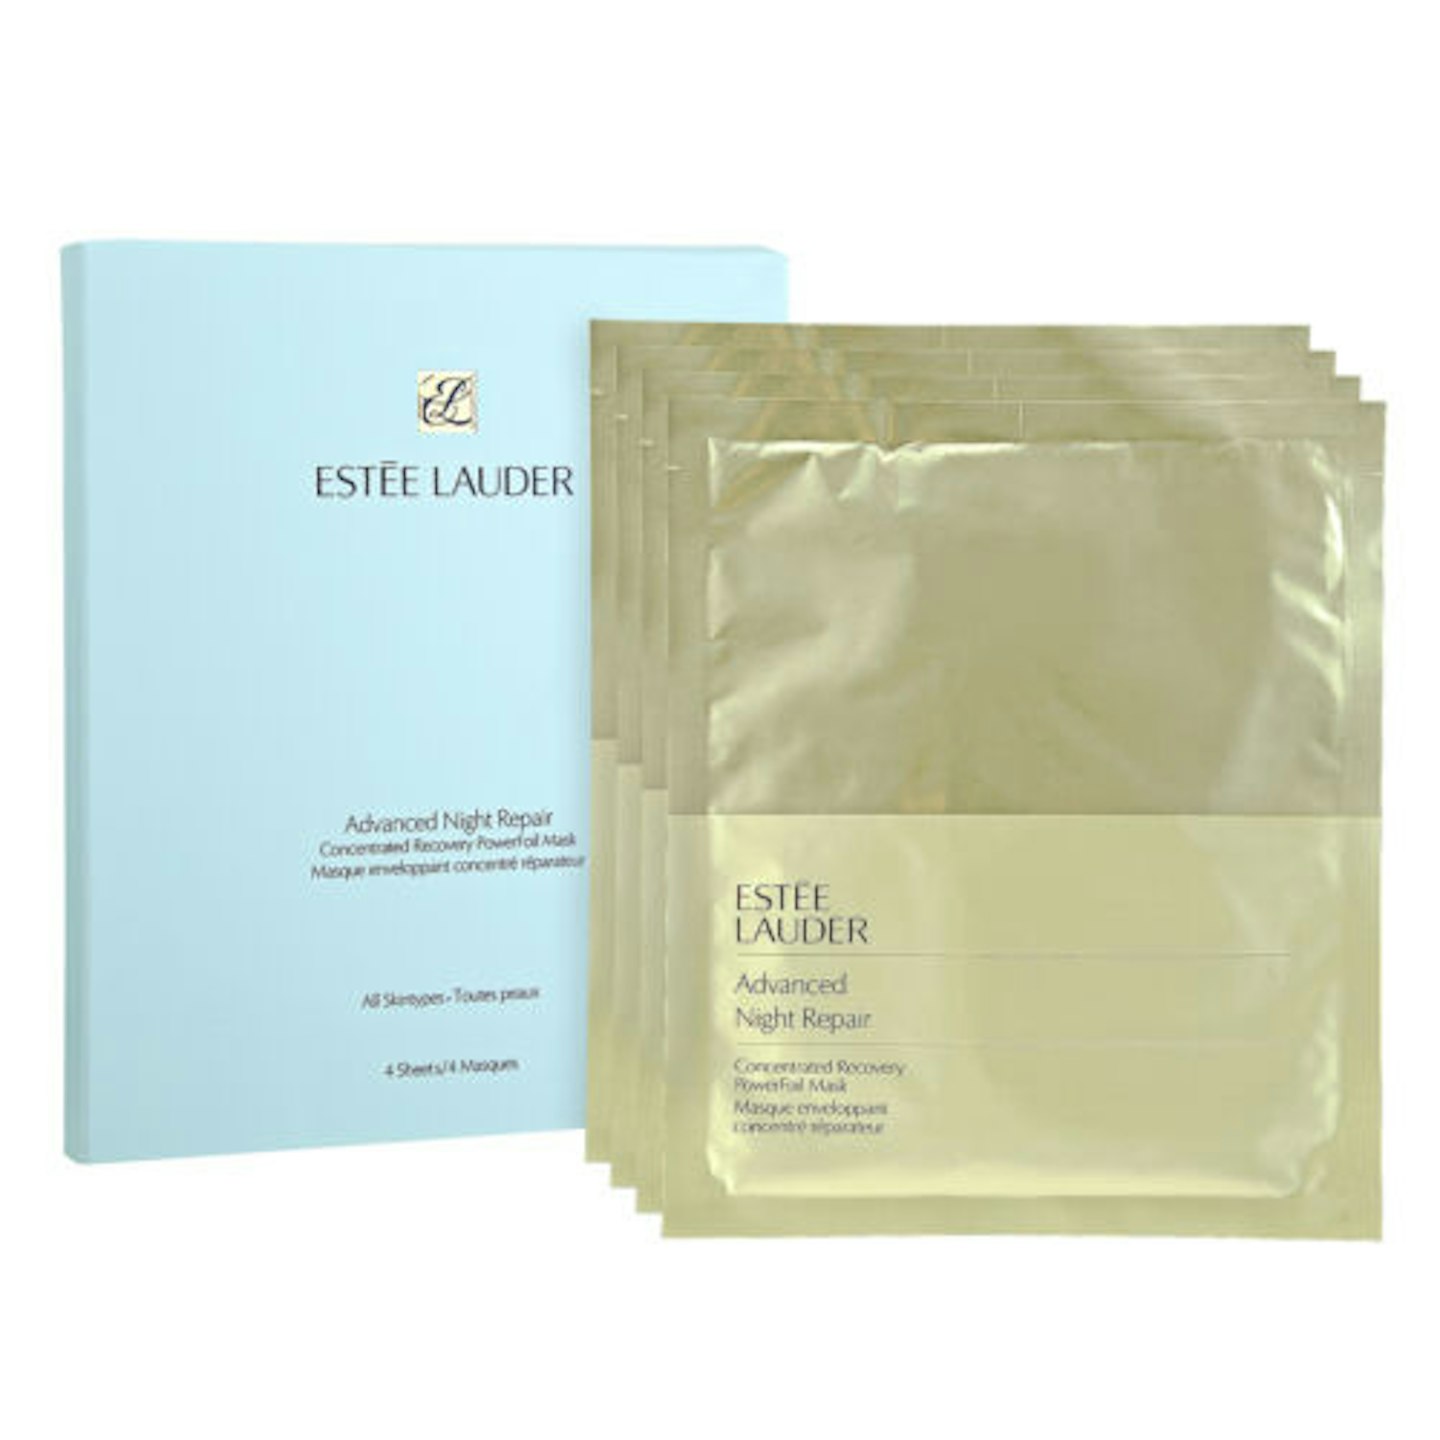 Estee Lauder Advanced Night Repair Powerfoil Recovery Mask, £110 for 8